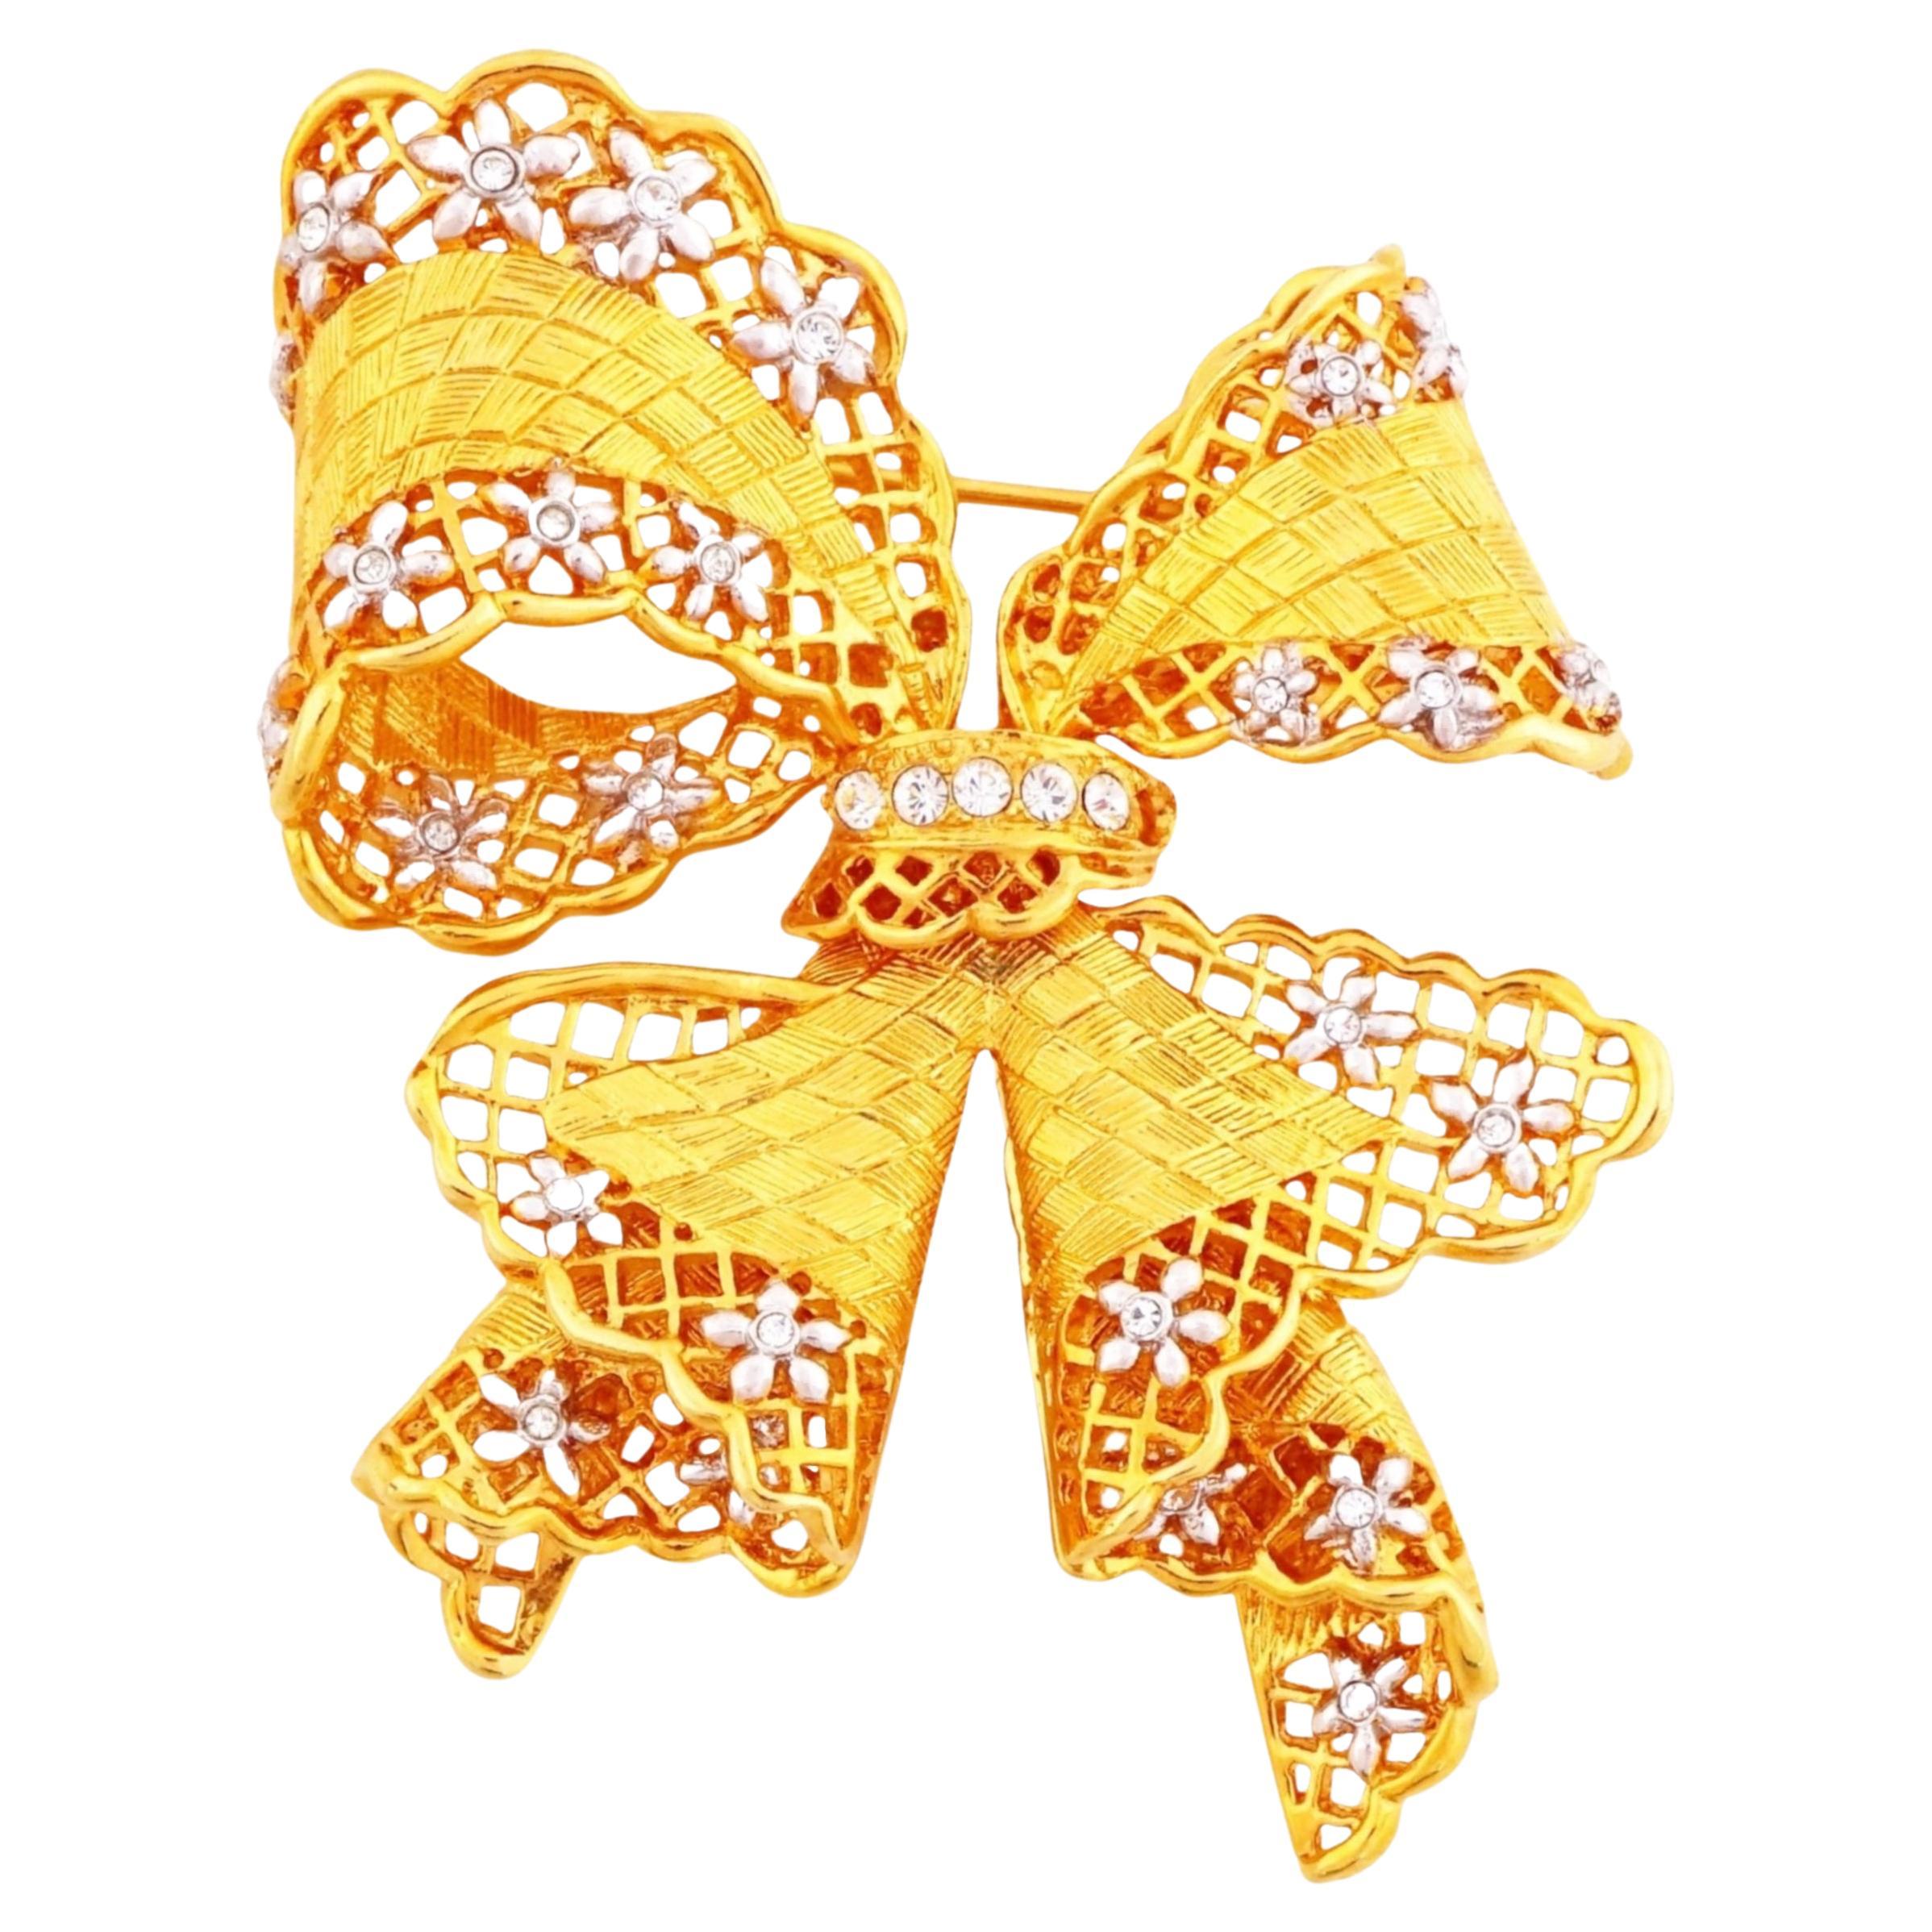 Gold Bow Figural Brooch With Openwork Lattice and Floral Motif By Nolan Miller